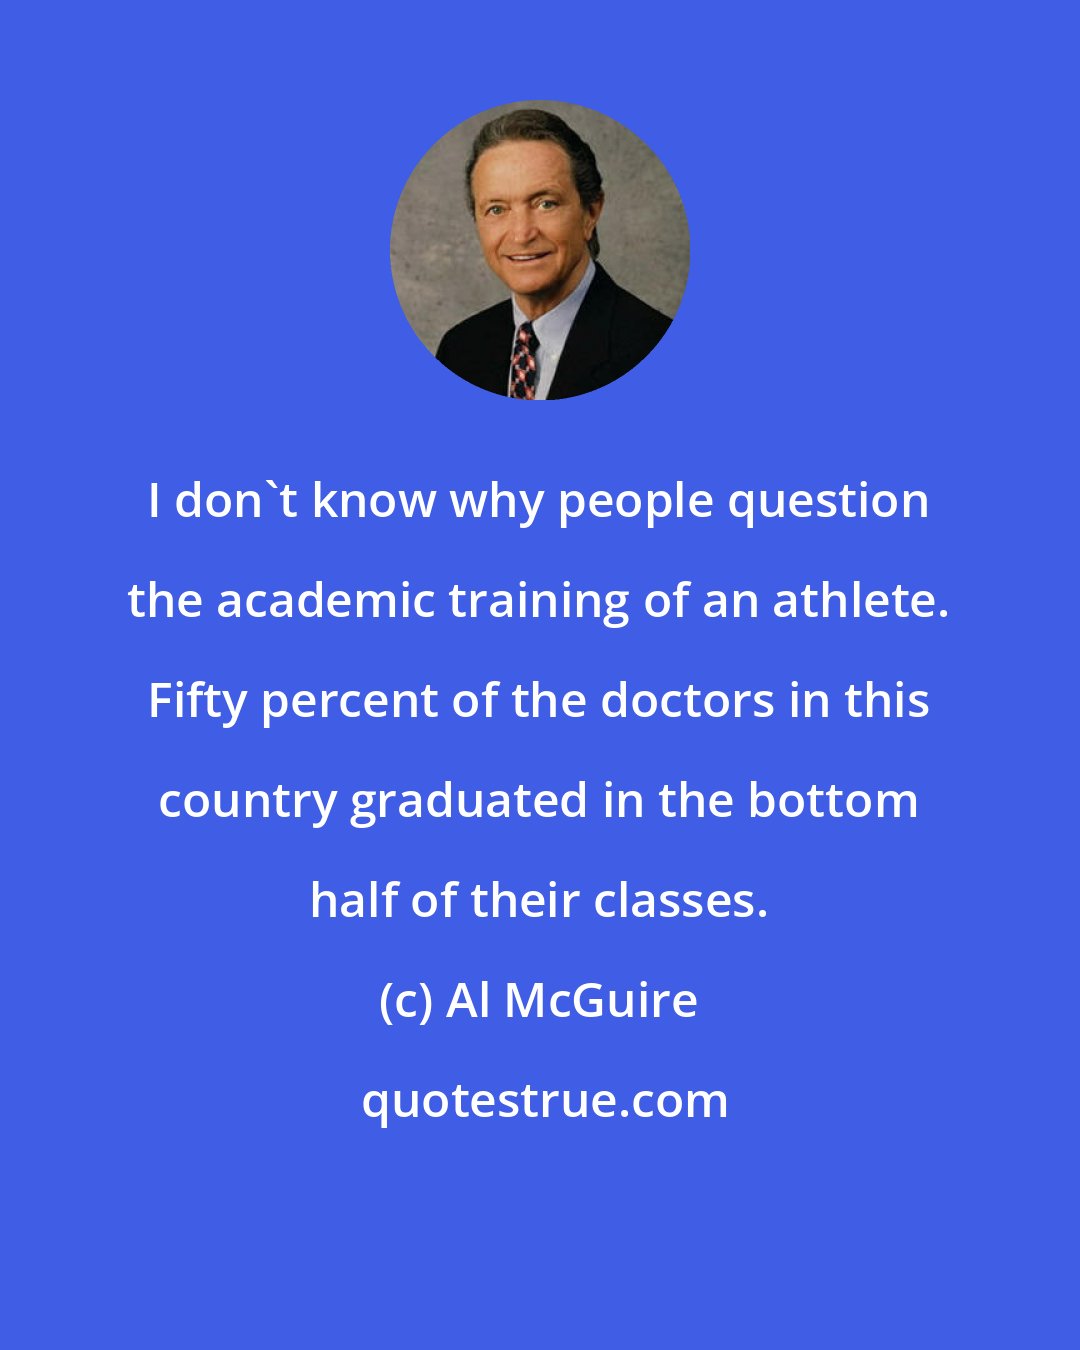 Al McGuire: I don't know why people question the academic training of an athlete. Fifty percent of the doctors in this country graduated in the bottom half of their classes.